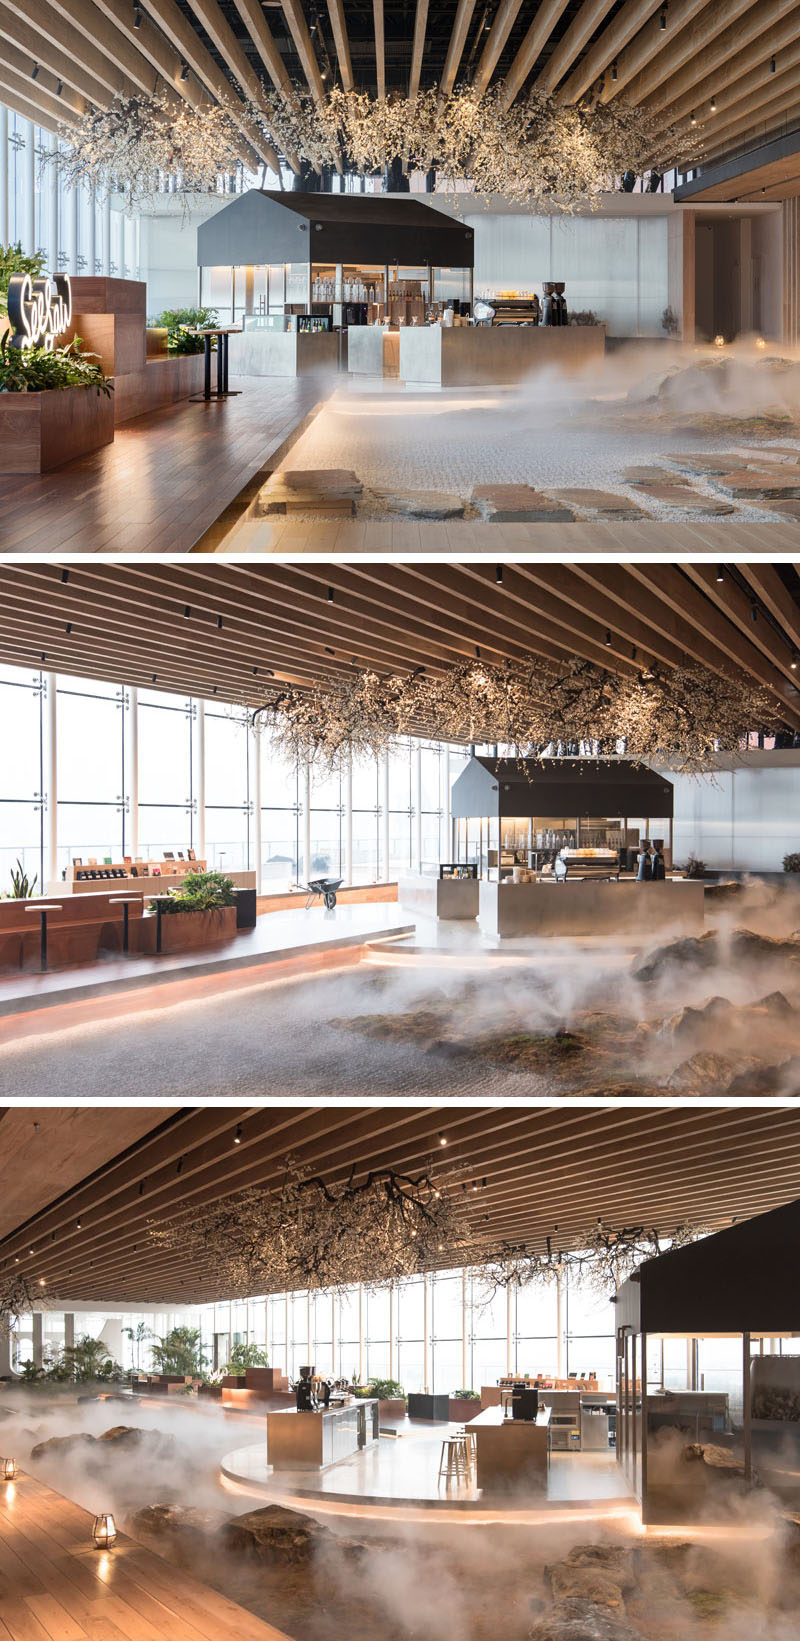 This modern coffee shop has a stepping stone path that leads through a mist-covered landscape with mossy rocks and sand, to a wooden 'ship deck'. The mist-covered landscape represents the water surface that surrounds a ship. #CoffeeShop #Cafe #InteriorDesign #Landscaping